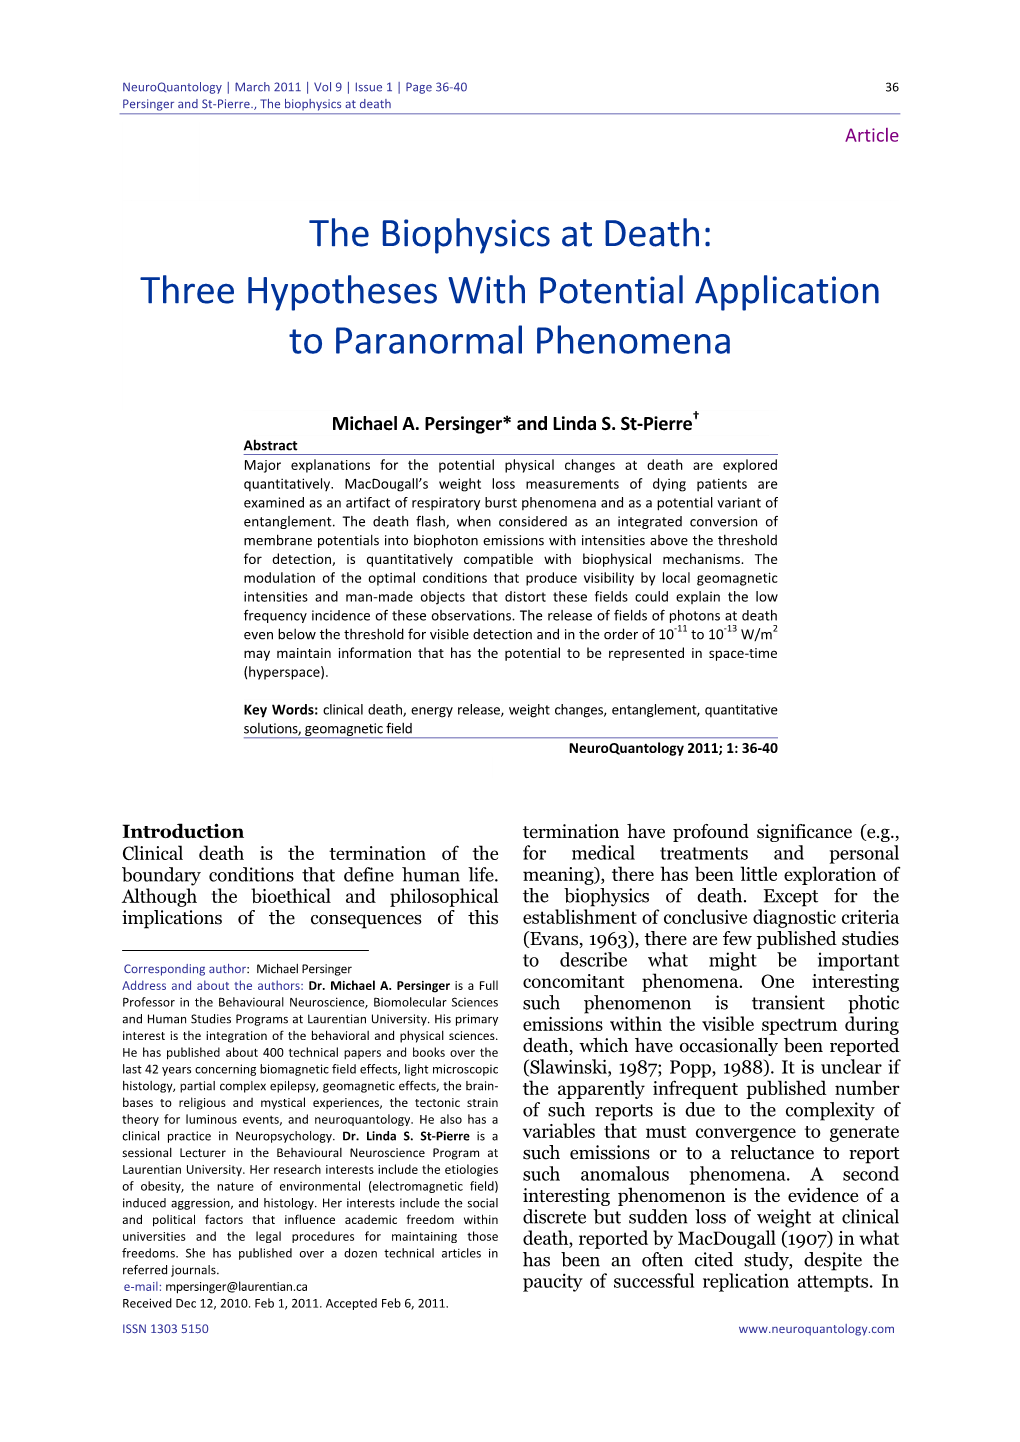 The Biophysics at Death: Three Hypotheses with Potential Application to Paranormal Phenomena